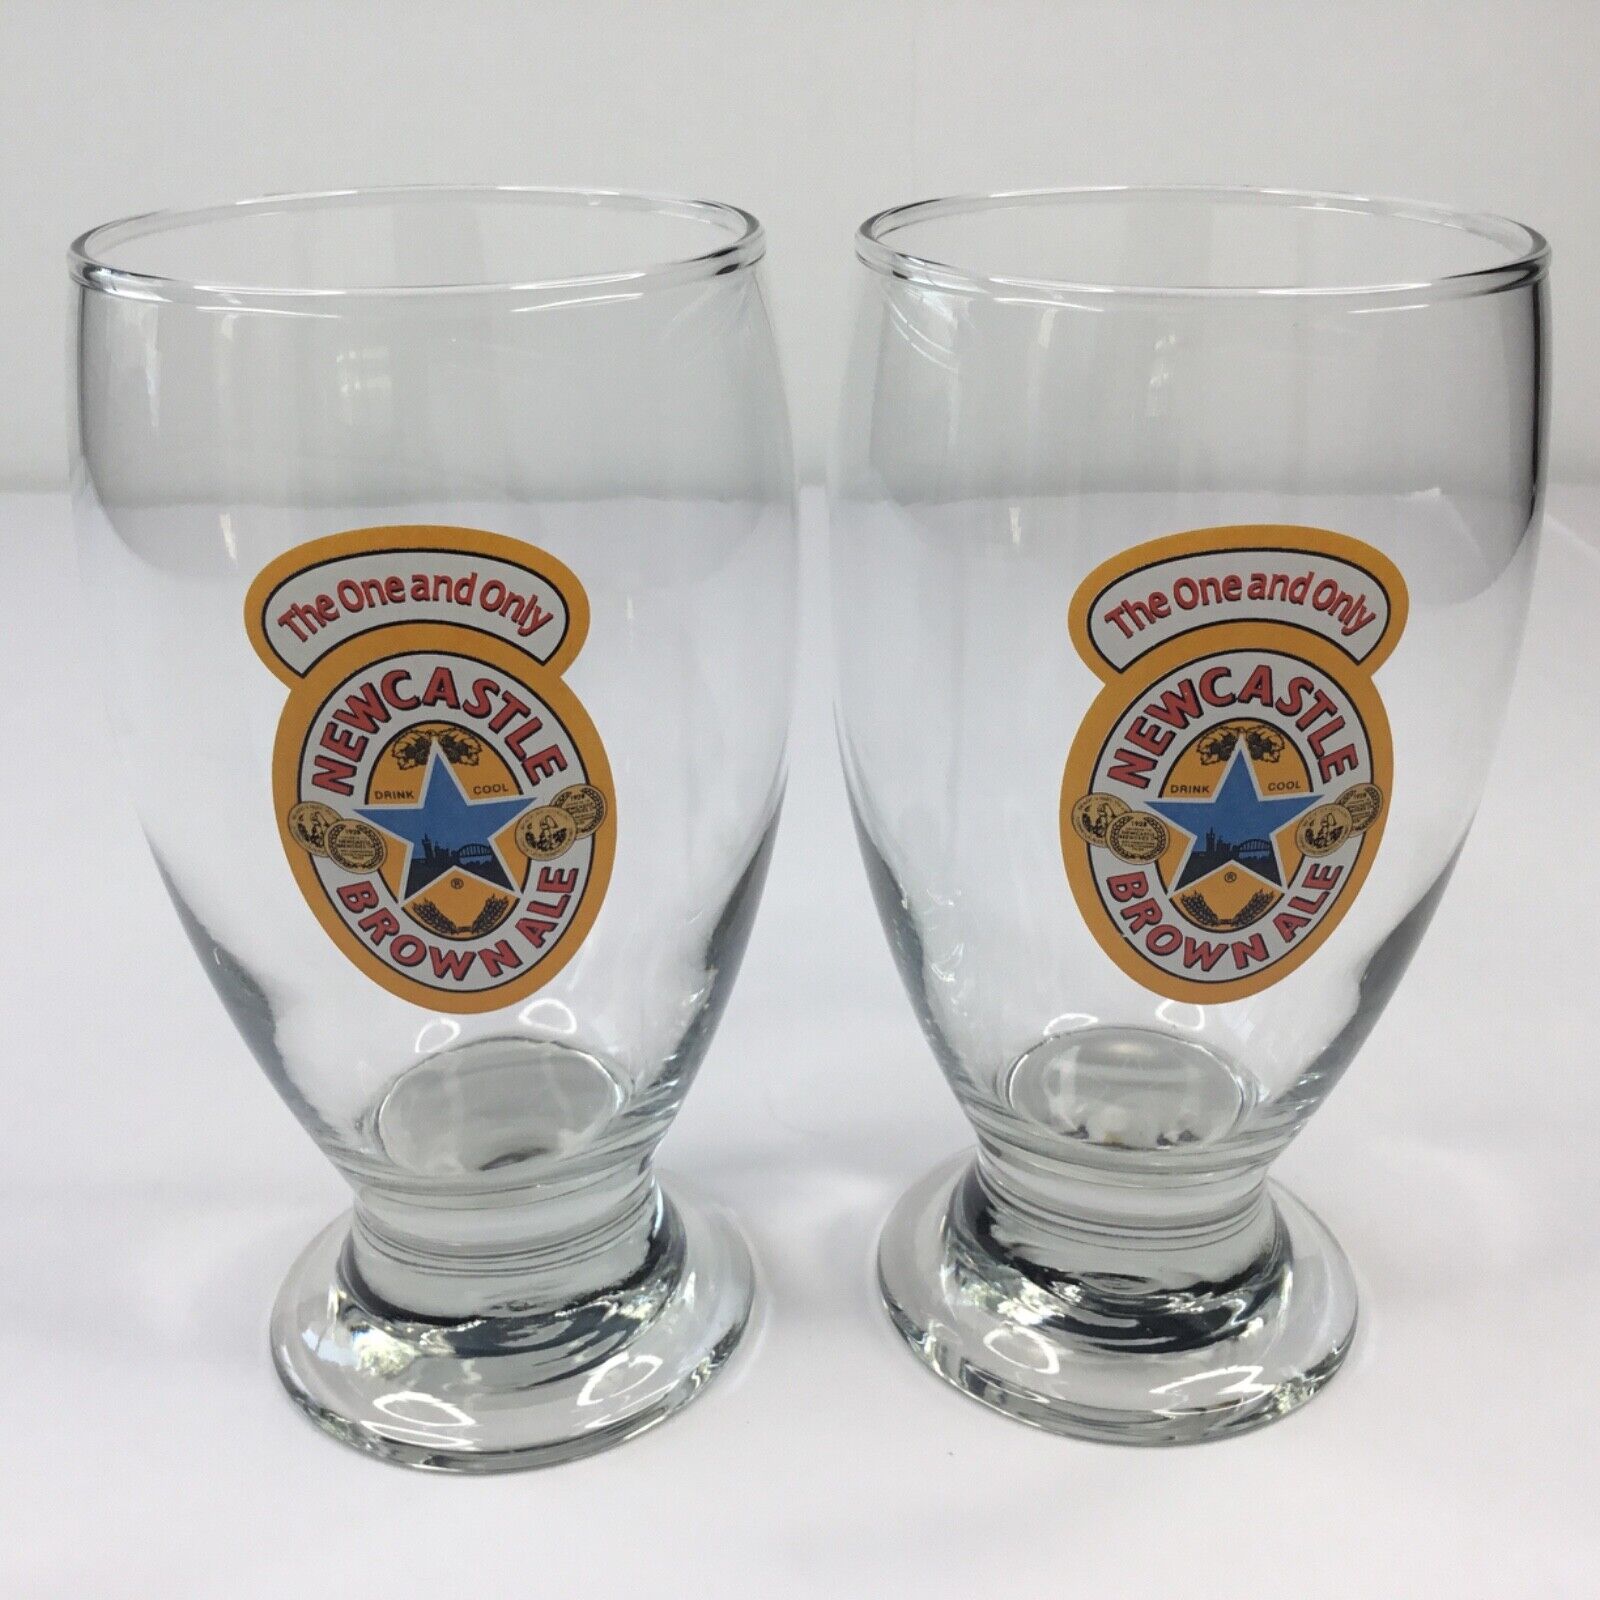 New Castle Brown Ale  Tyne Brewery   The One and Only Beer   Goblet Style Glass